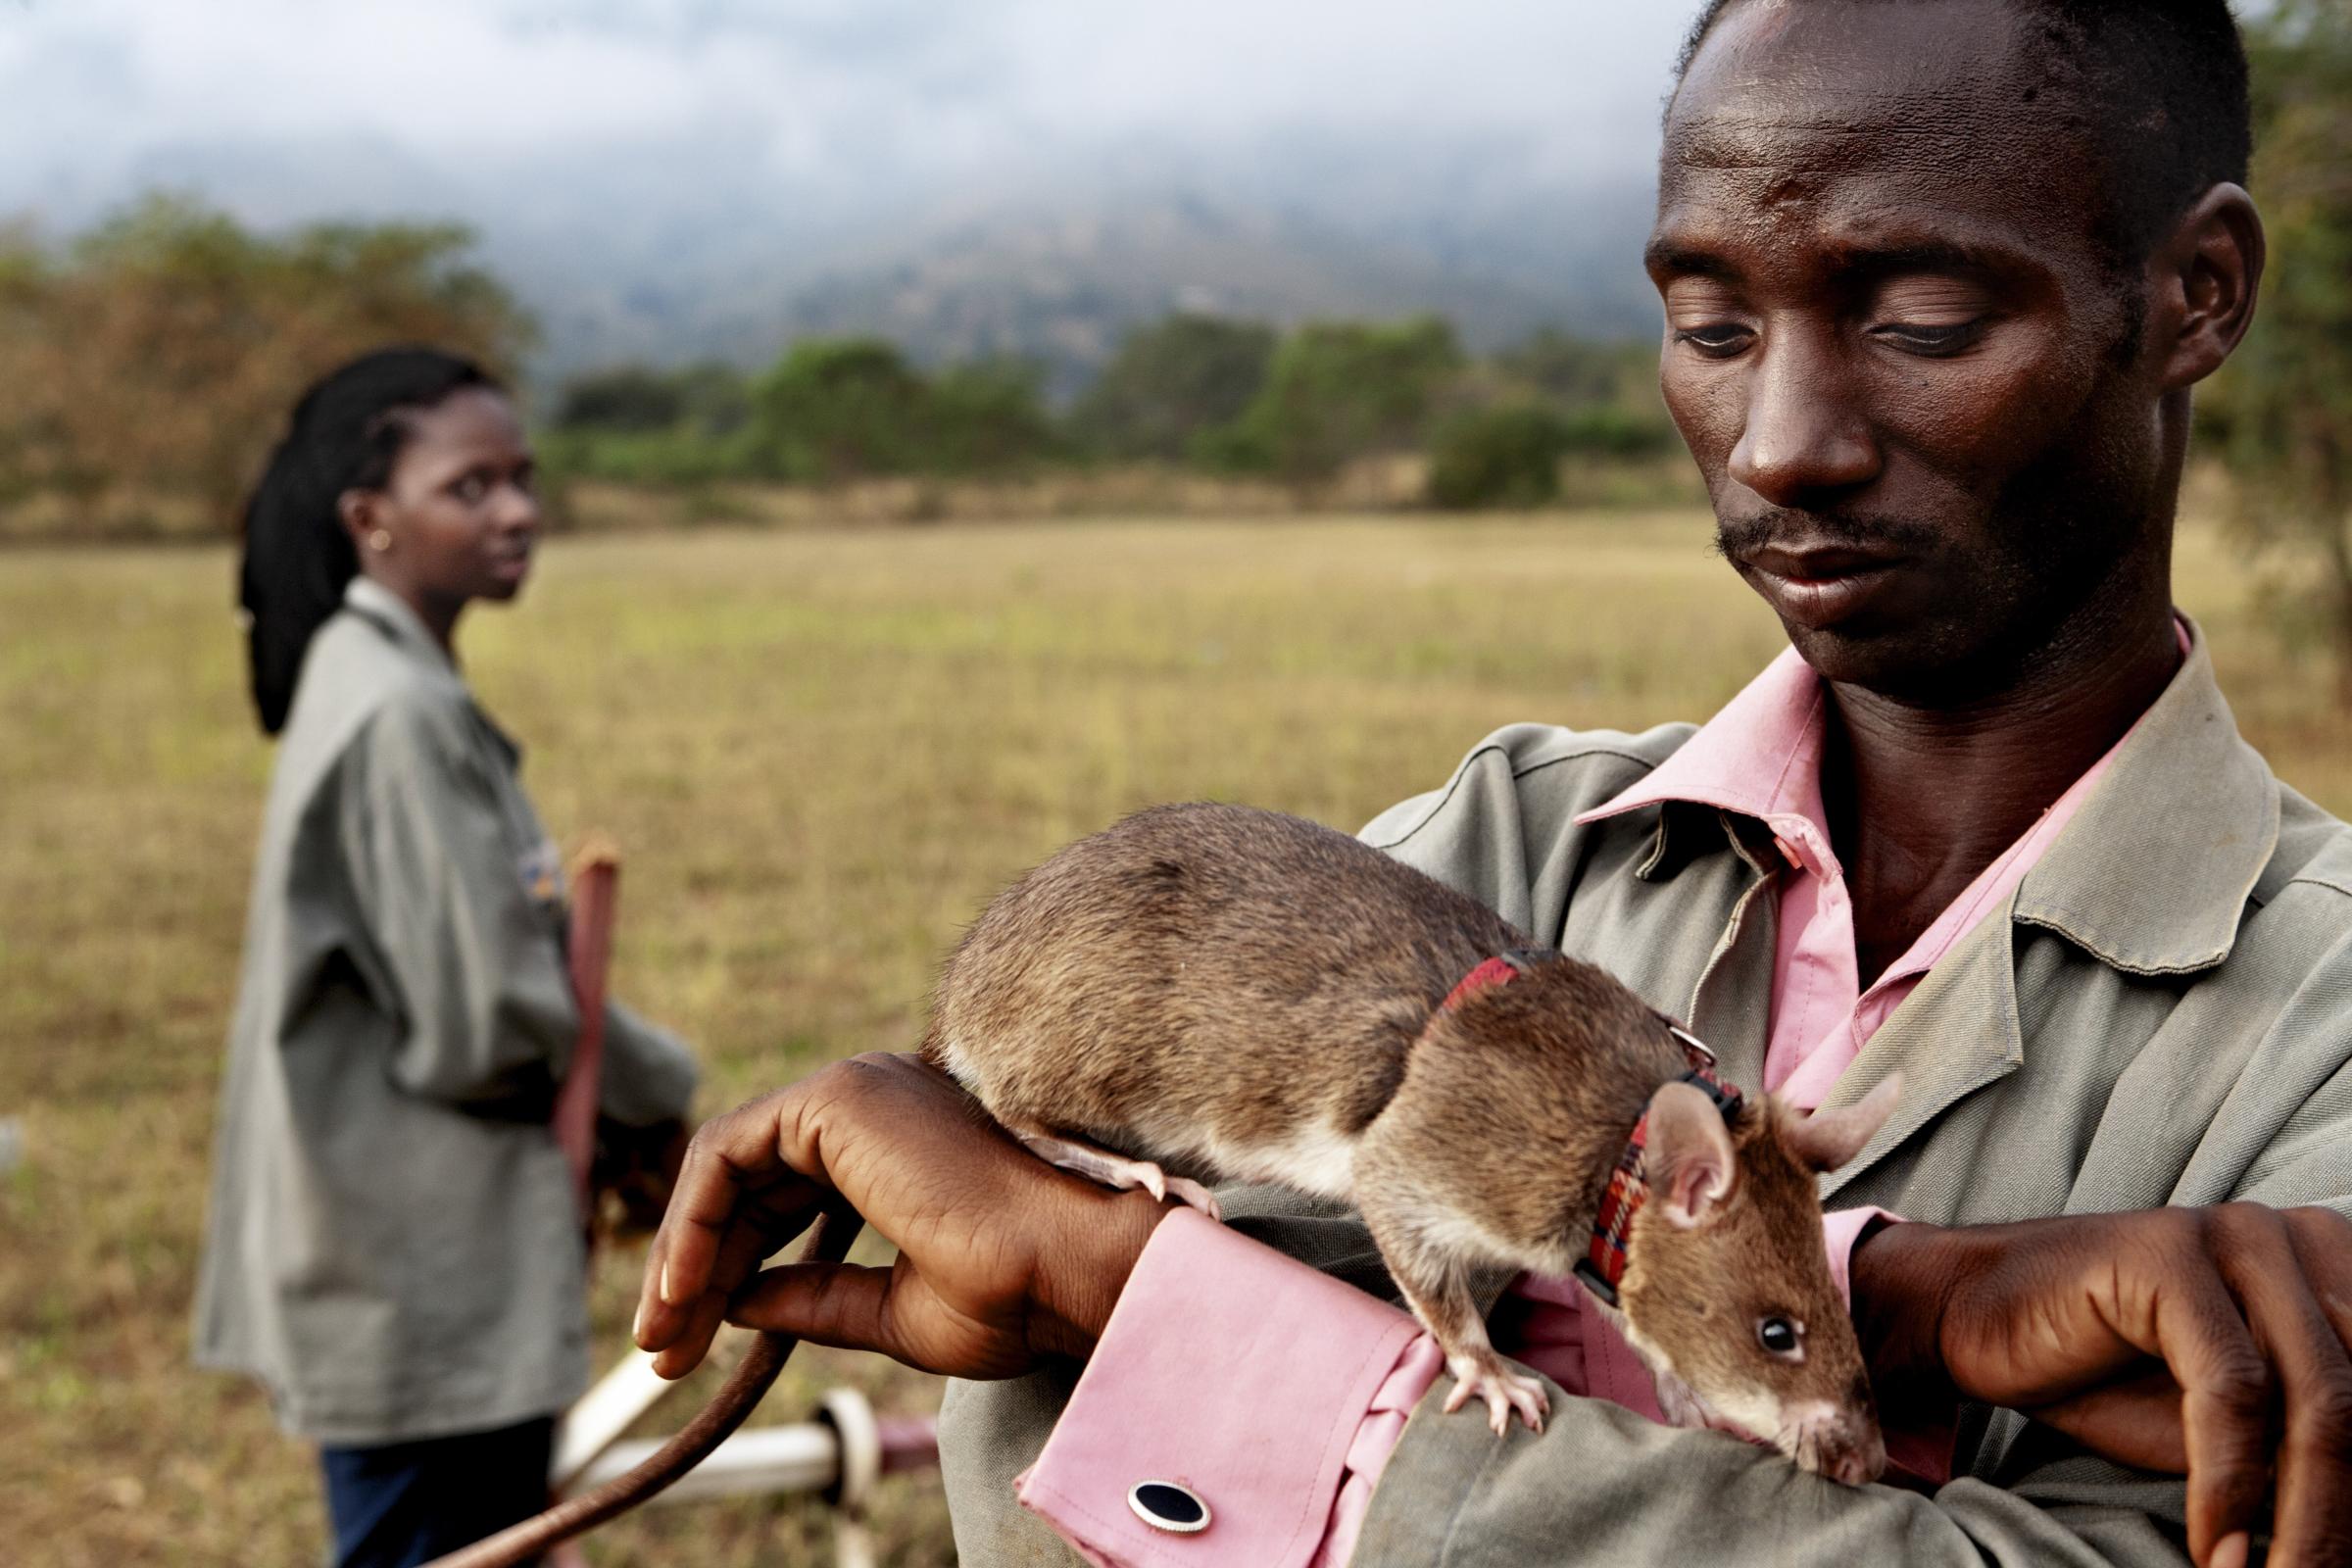 Local trainer Peter Mushi prepares a rat for its daily lesson on June 20, 2014 in Morogoro, Tanzania. Rats make perfect candidates for mine clearing because their sense of smell is excellent, they are natives of Africa and thus immune to many tropical diseases, and, most importantly, their weight is perfect as they weigh less than the 10kg required to detonate a mine.